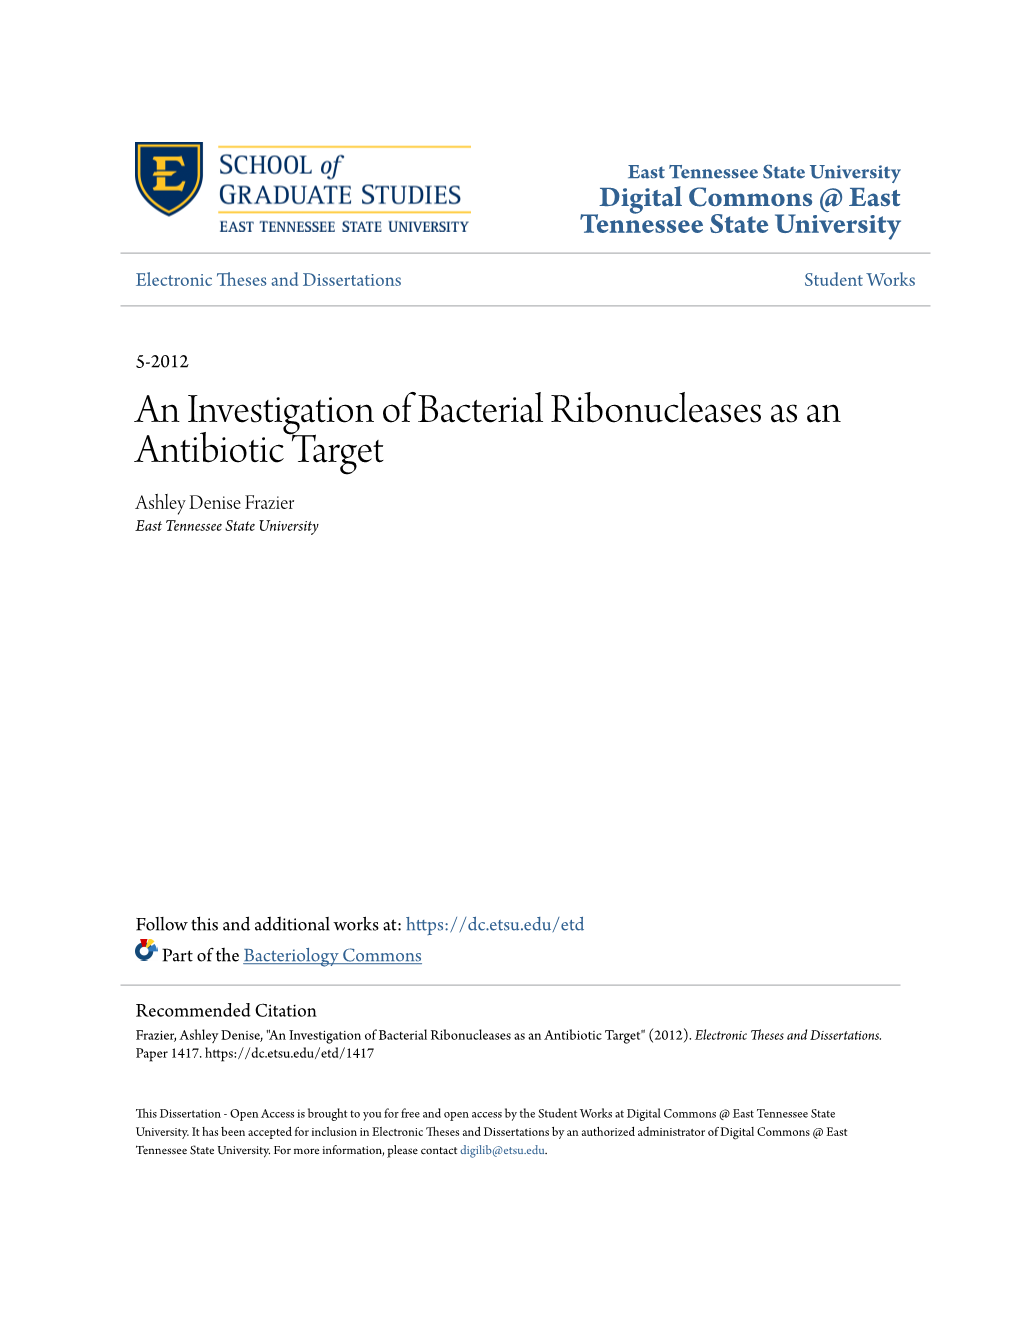 An Investigation of Bacterial Ribonucleases As an Antibiotic Target Ashley Denise Frazier East Tennessee State University